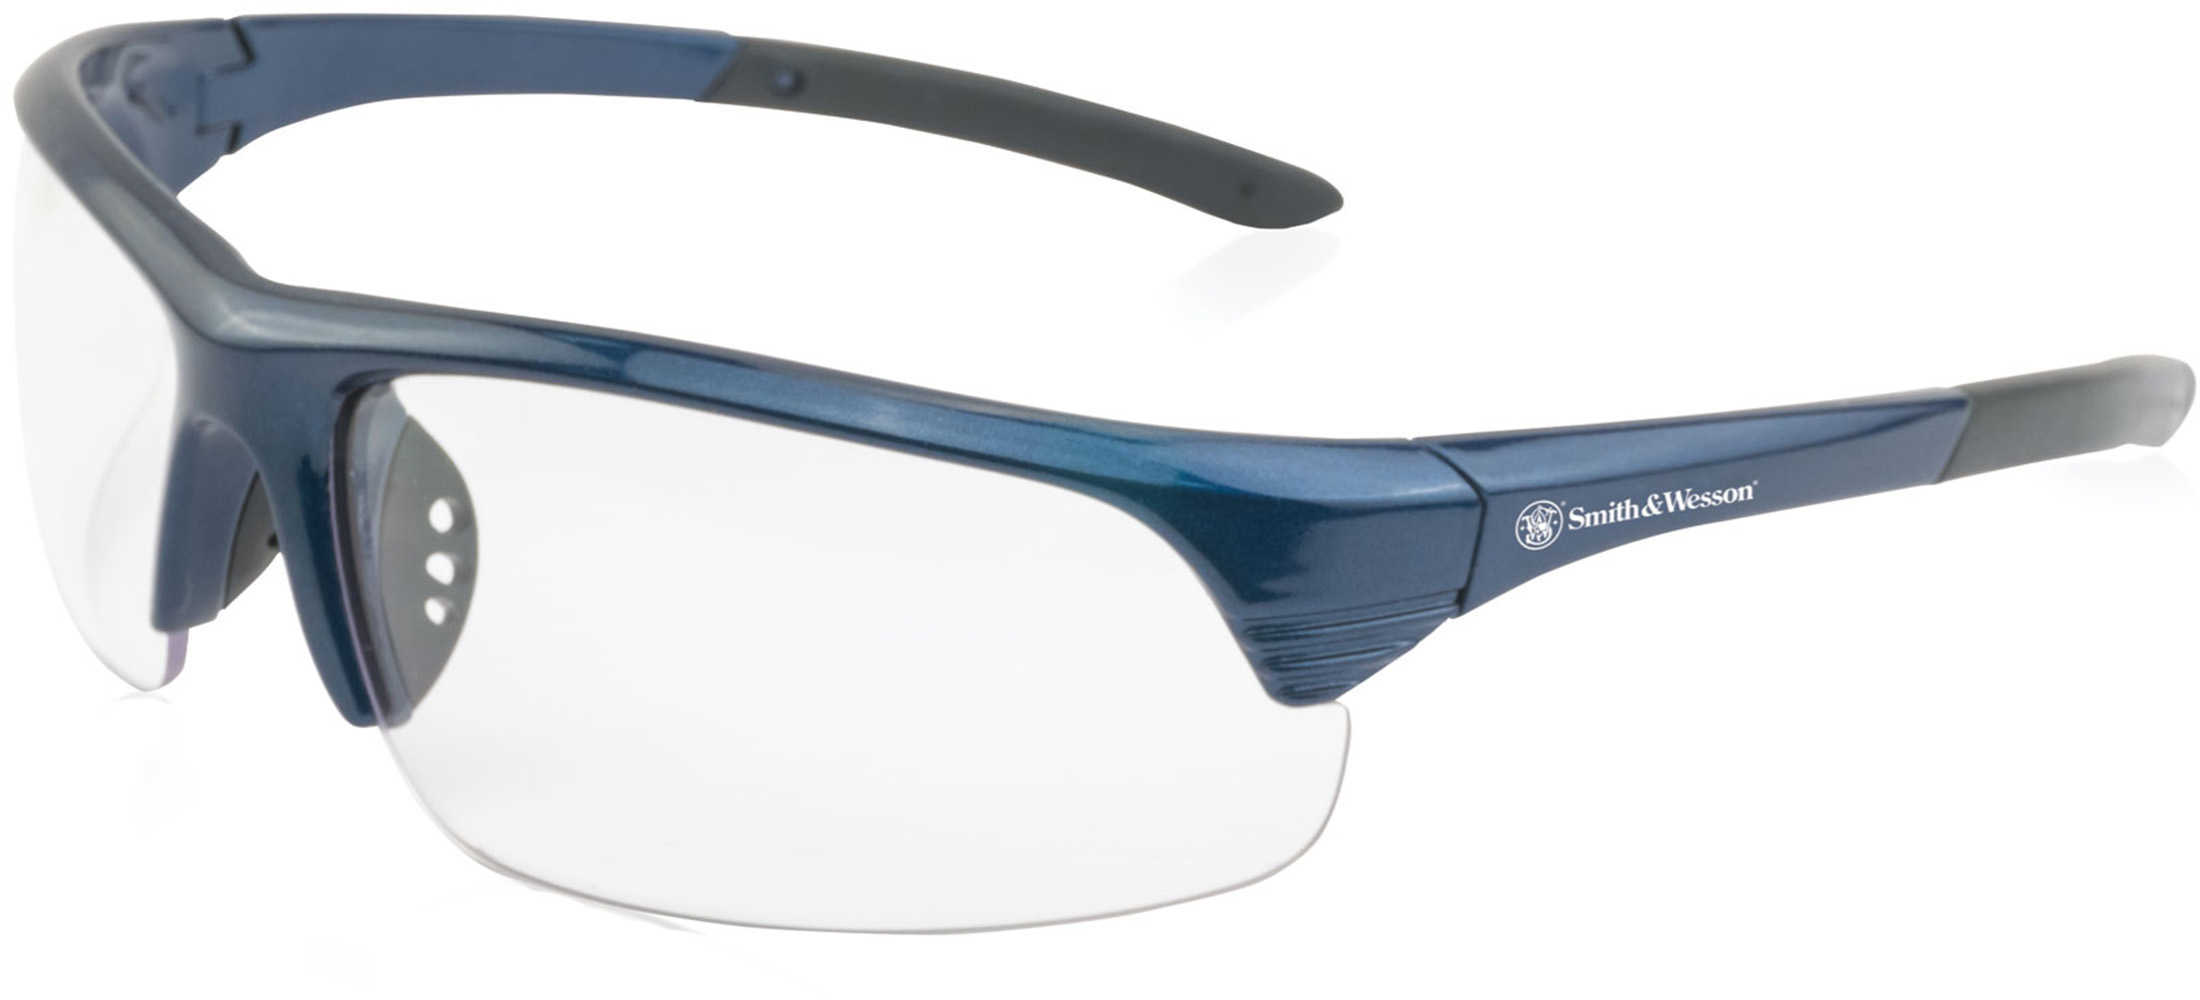 S&W Corporal Blue Frame/Clear Lens Glasses